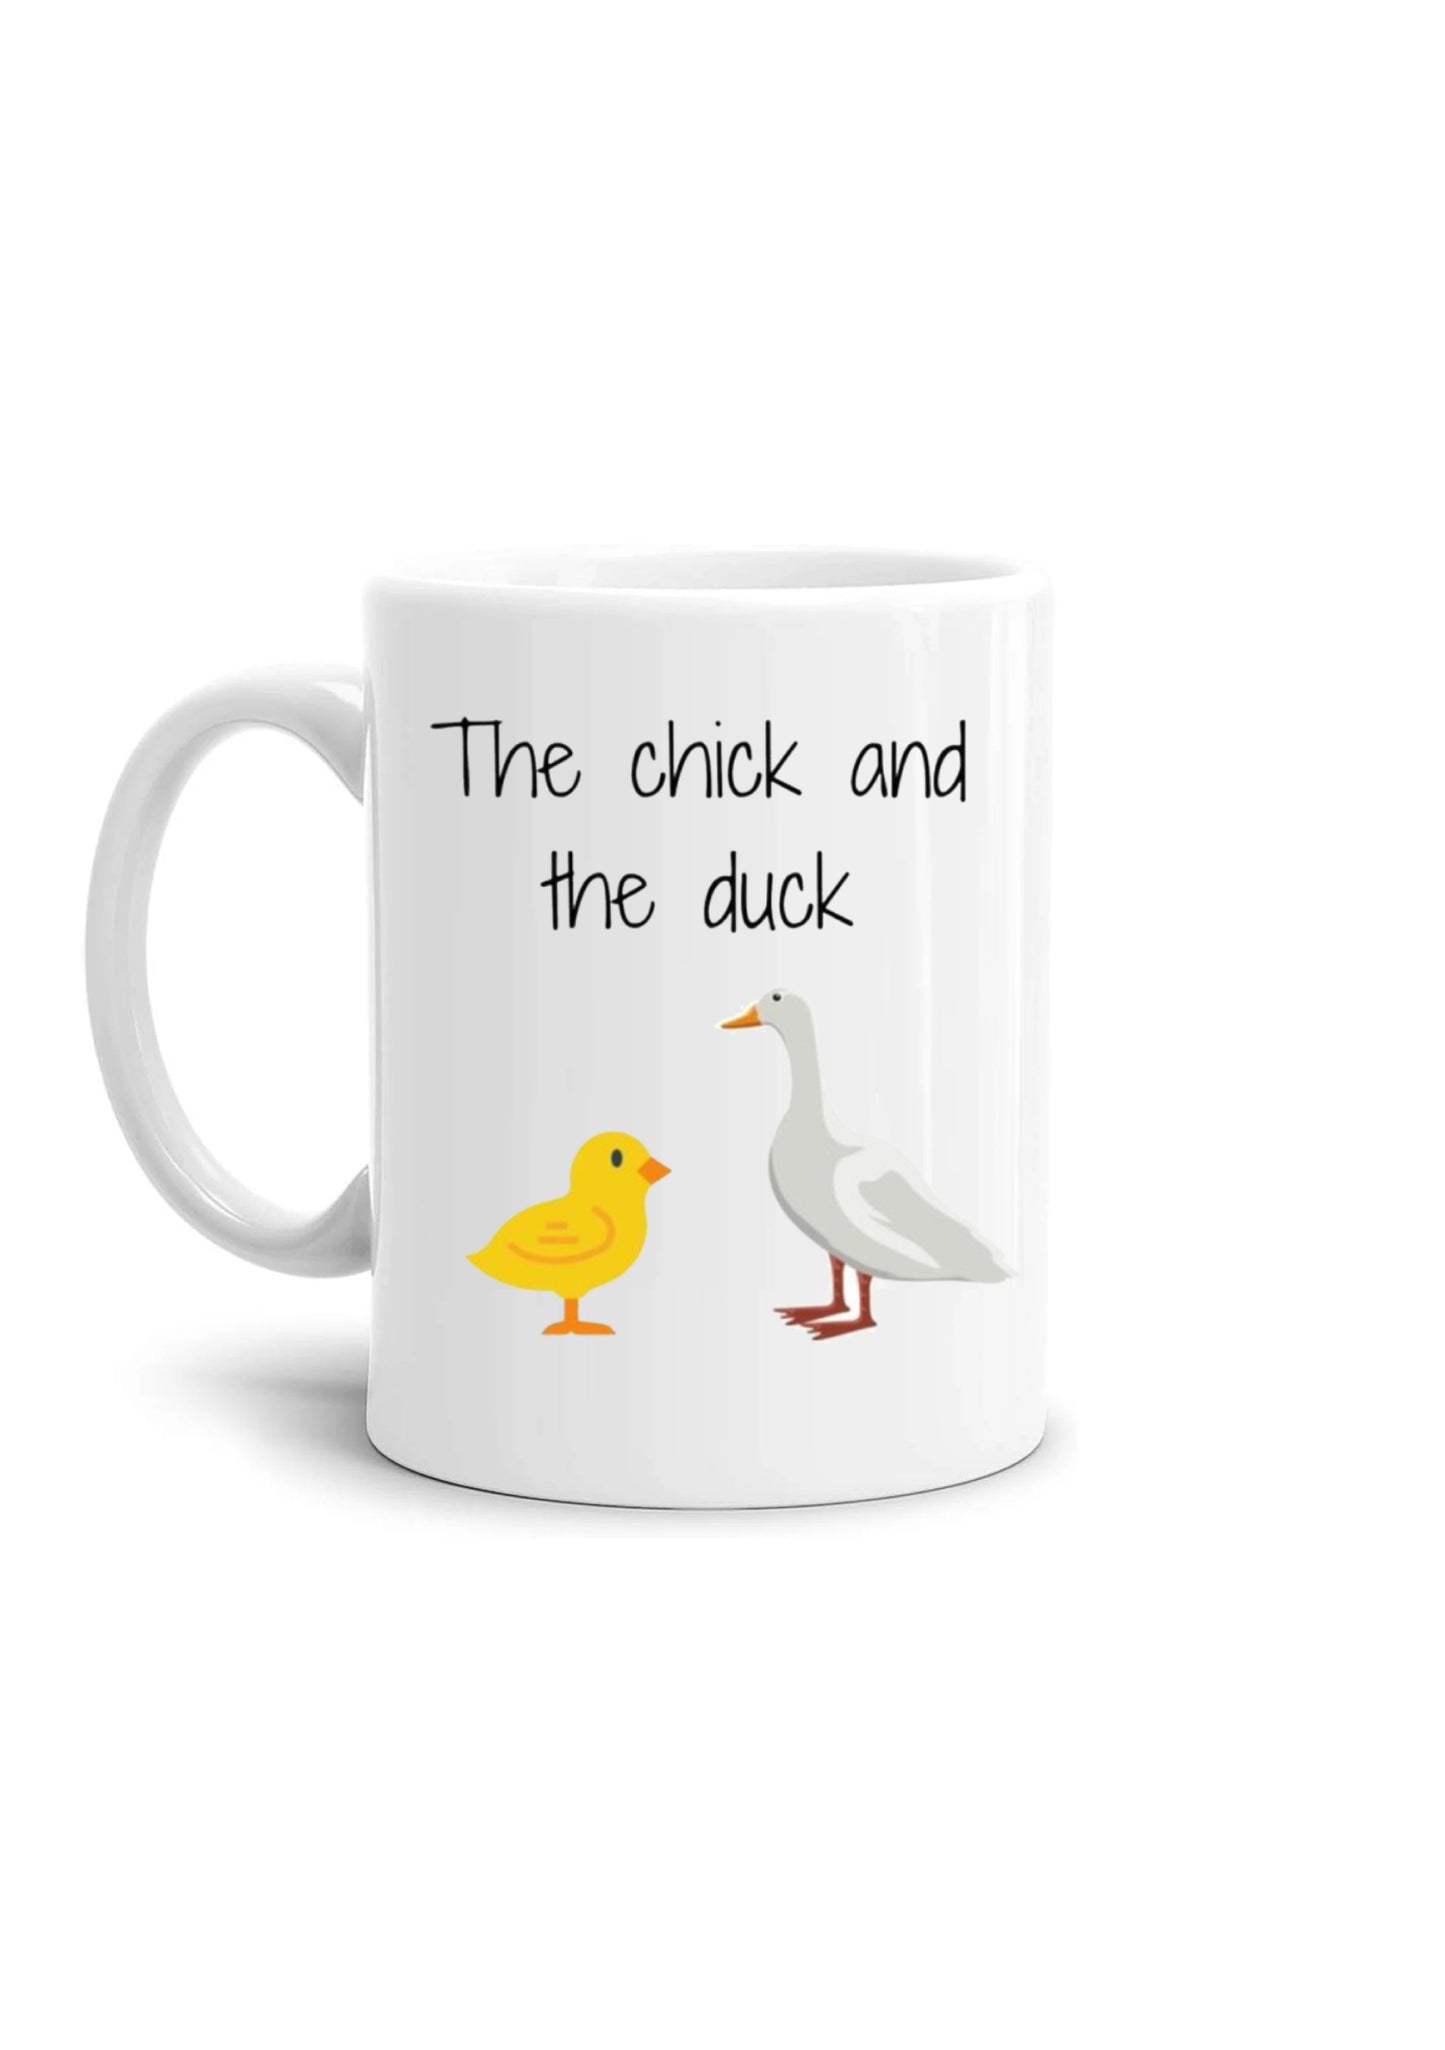 Mug mug - duck and chick tje chick and the duck friends